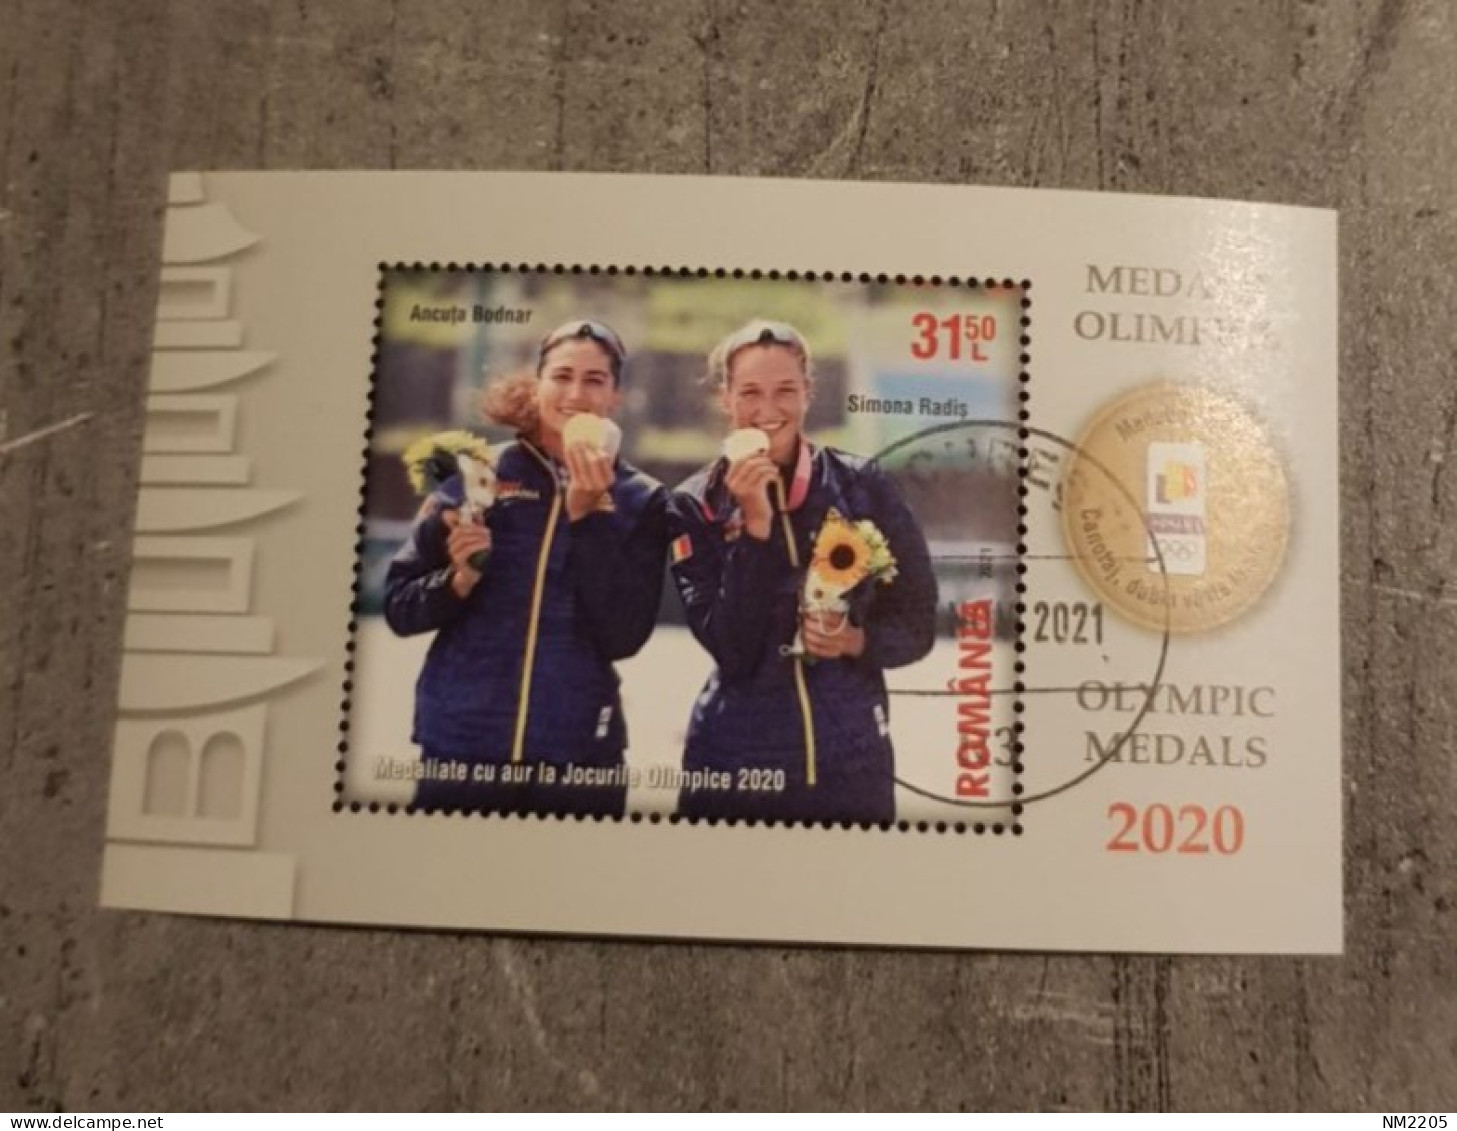 ROMANIA OLYMPIC MEDALS BLOCK USED - Used Stamps